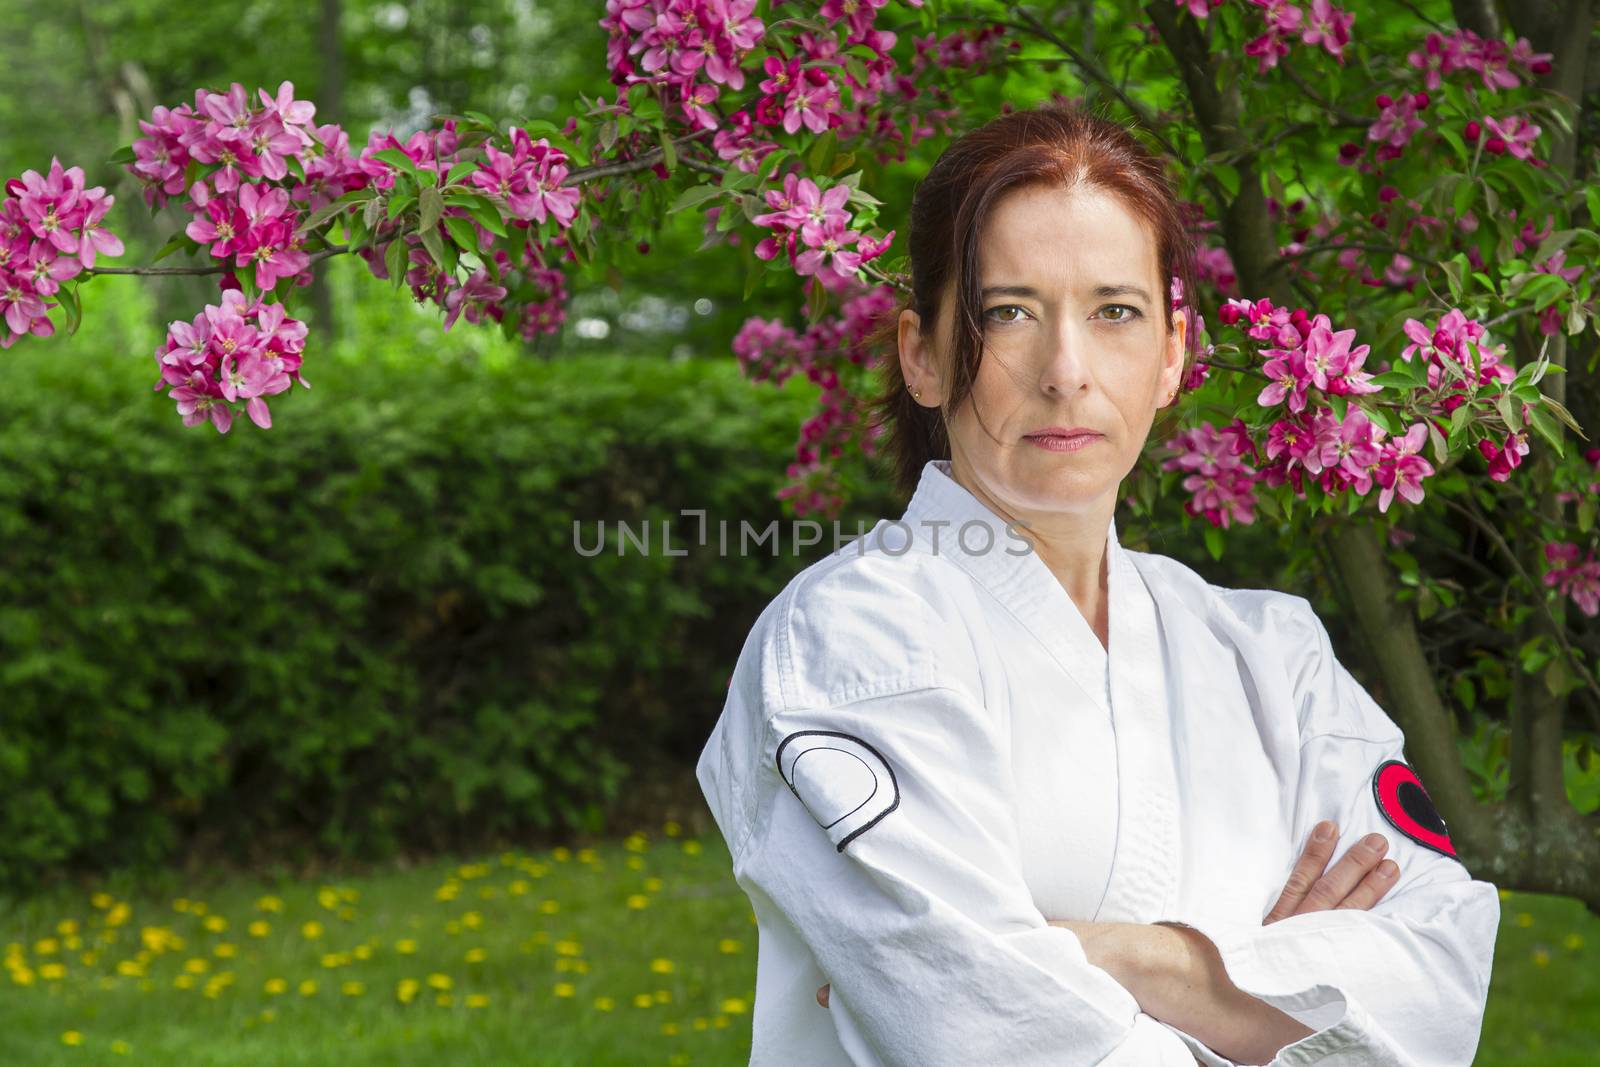 forty something martial artist woman with serious glare, under a cherry tree